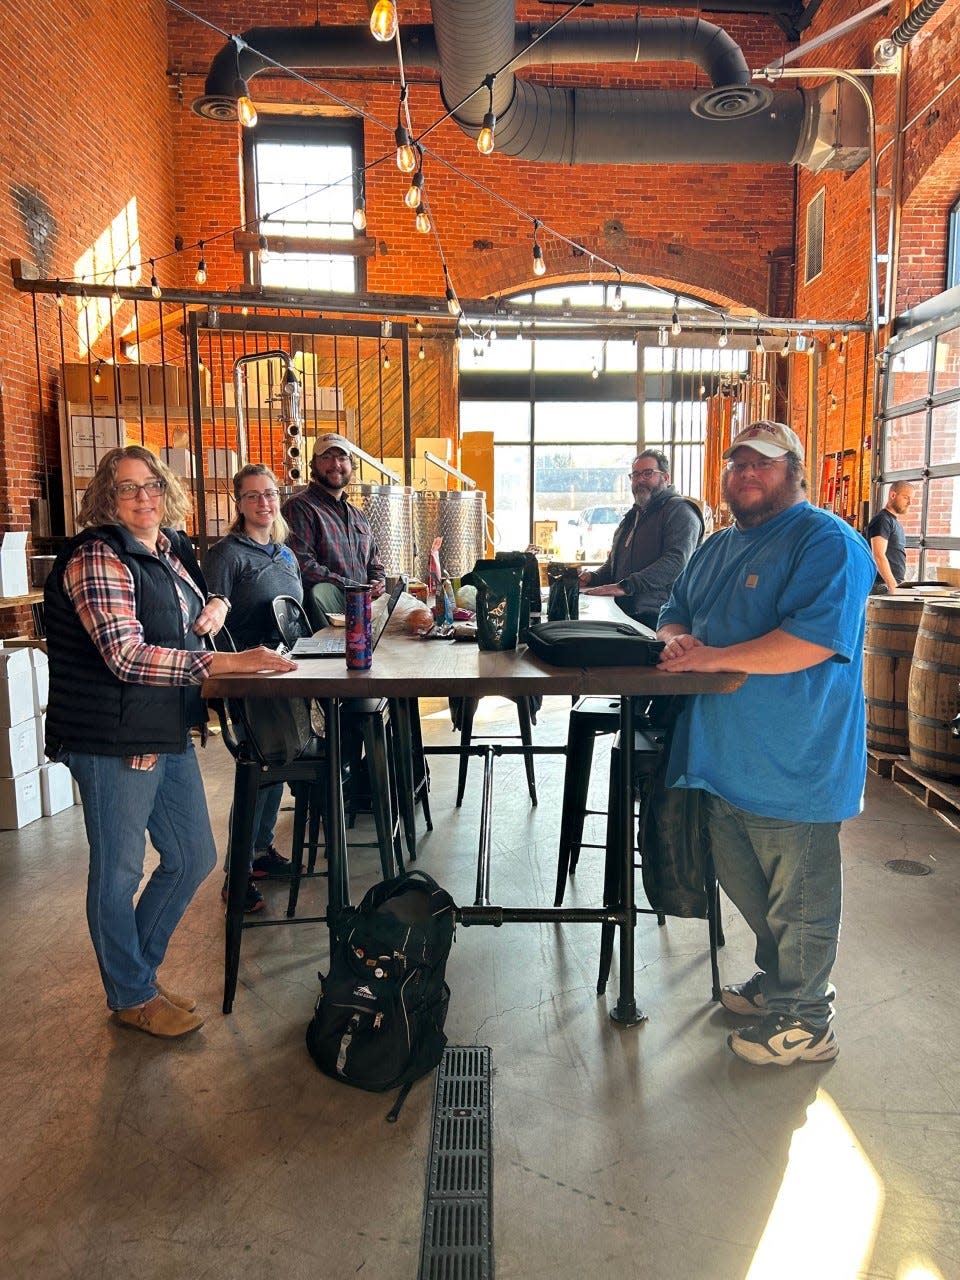 Northampton Community College's craft distillery students get hands-on experience at Doan Distillery in Quakertown, where they created their very own gin.